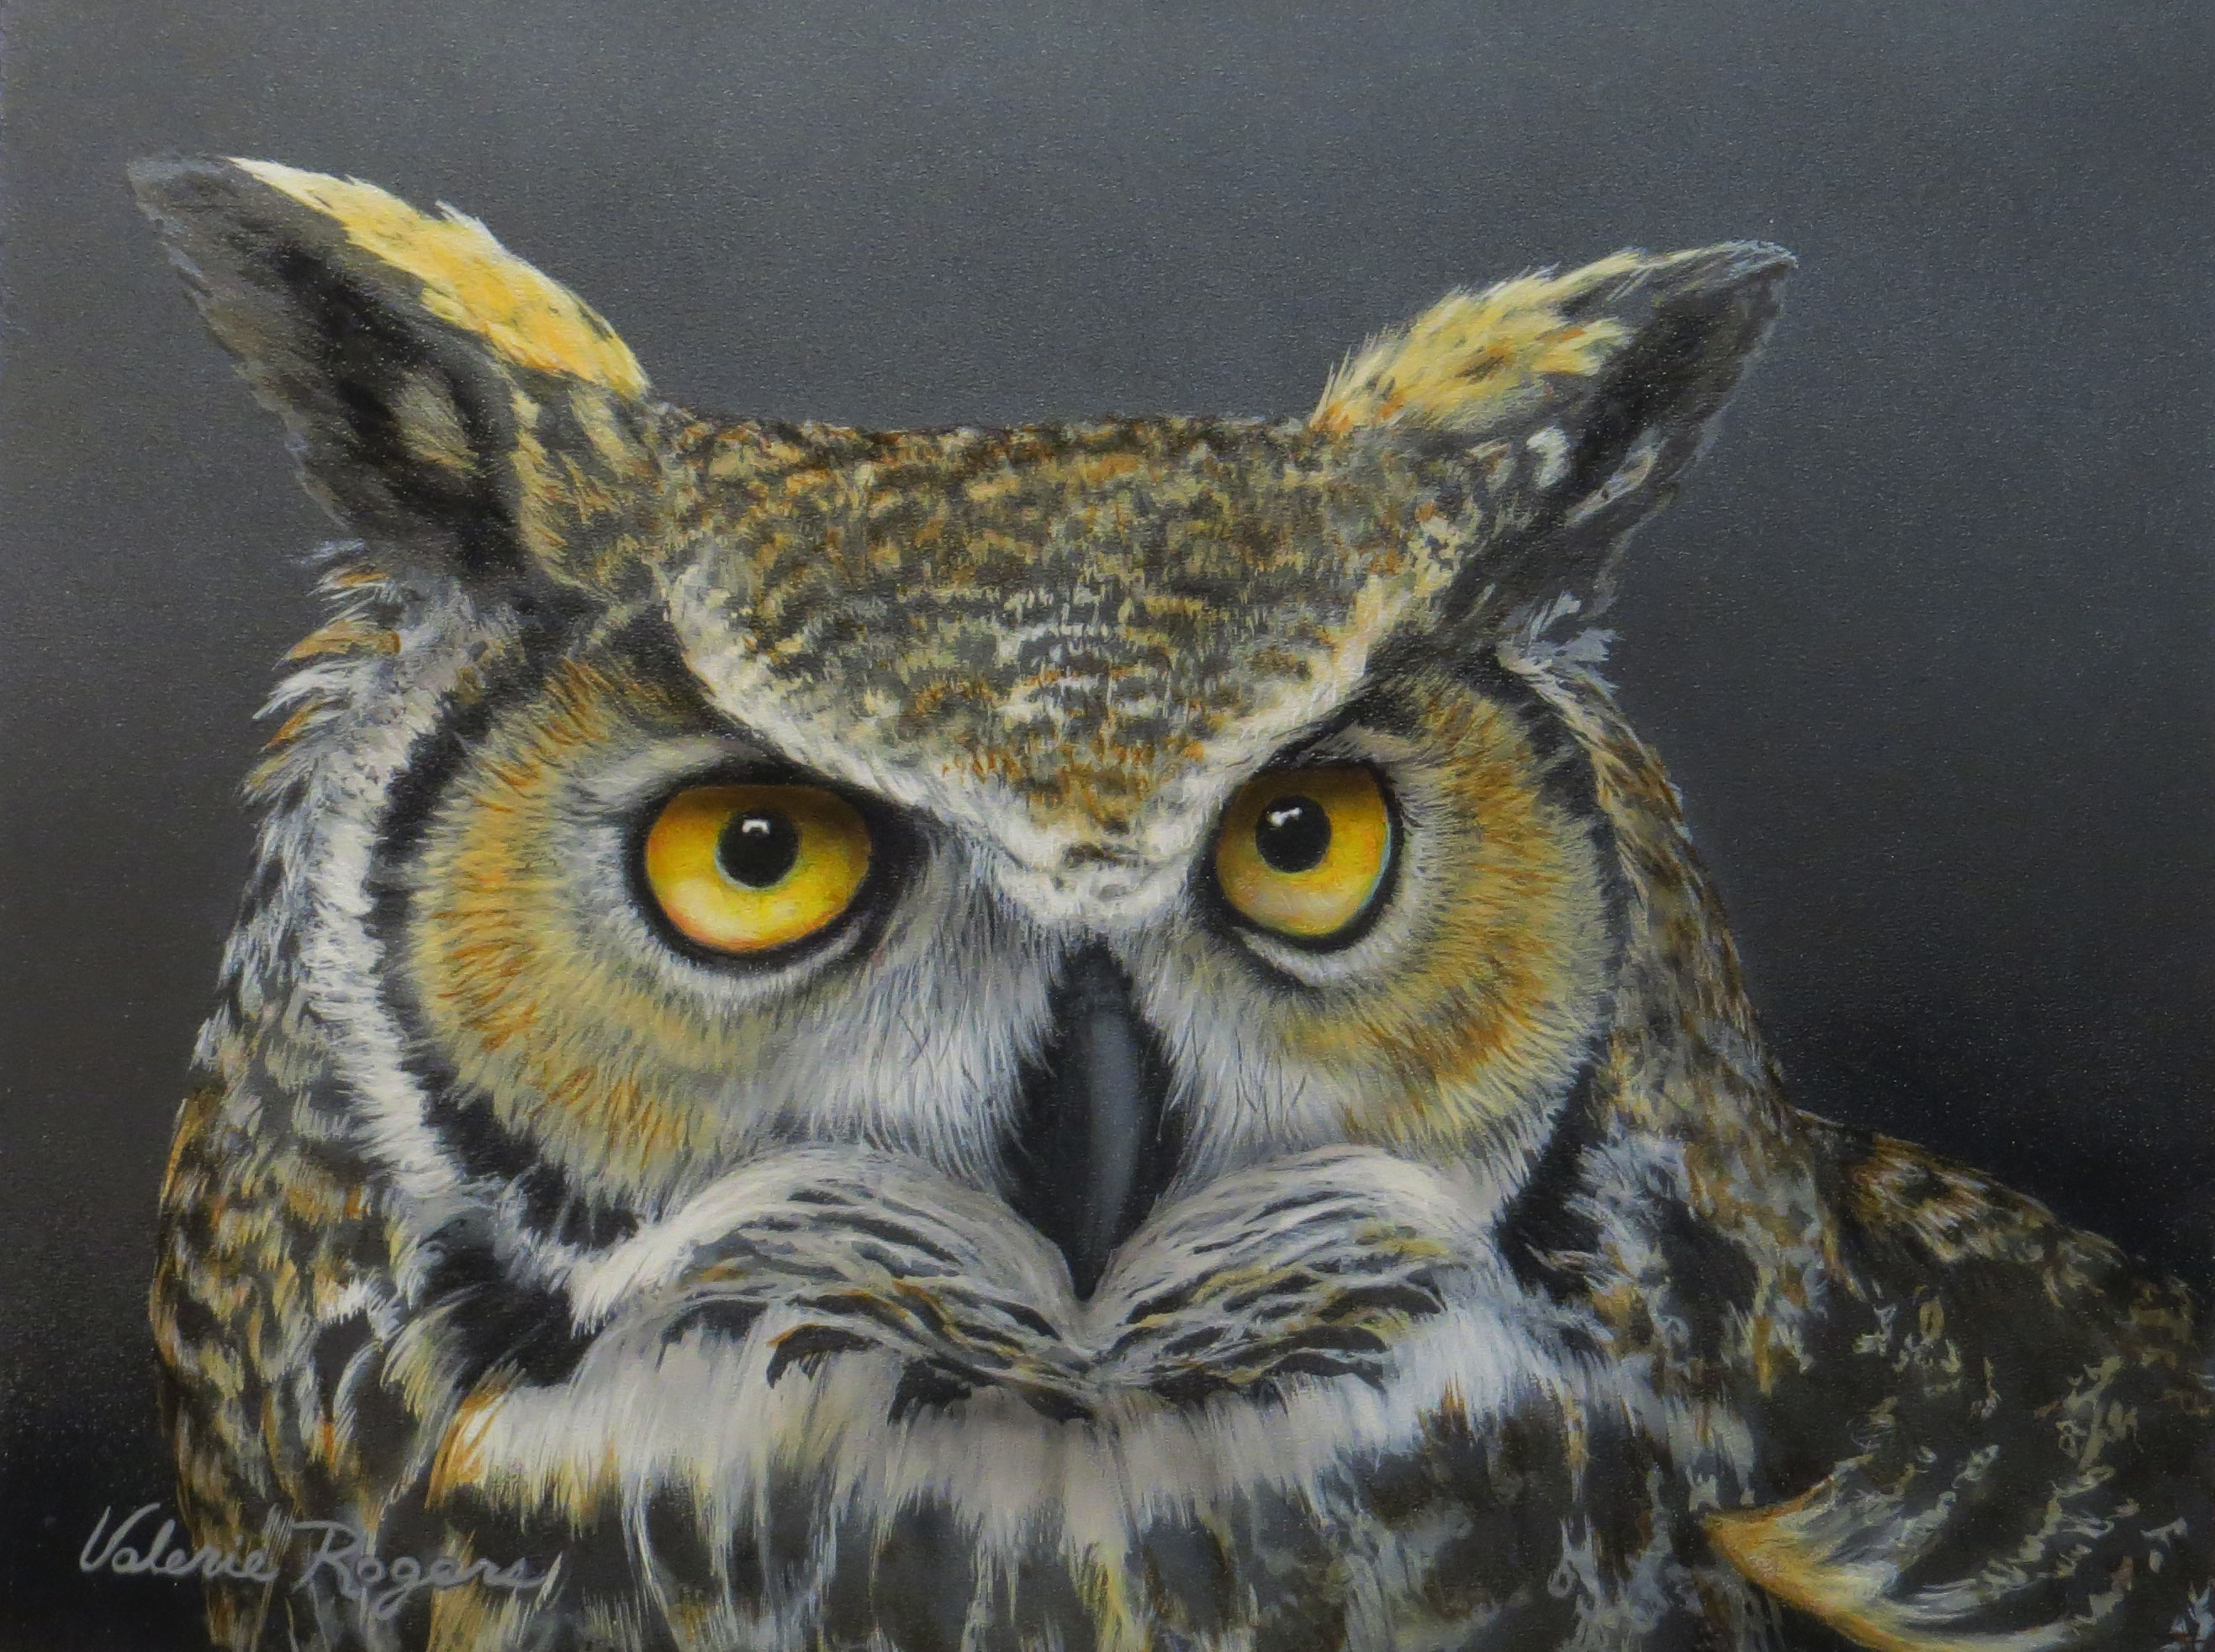 close up of great horned owl by Valerie Rogers